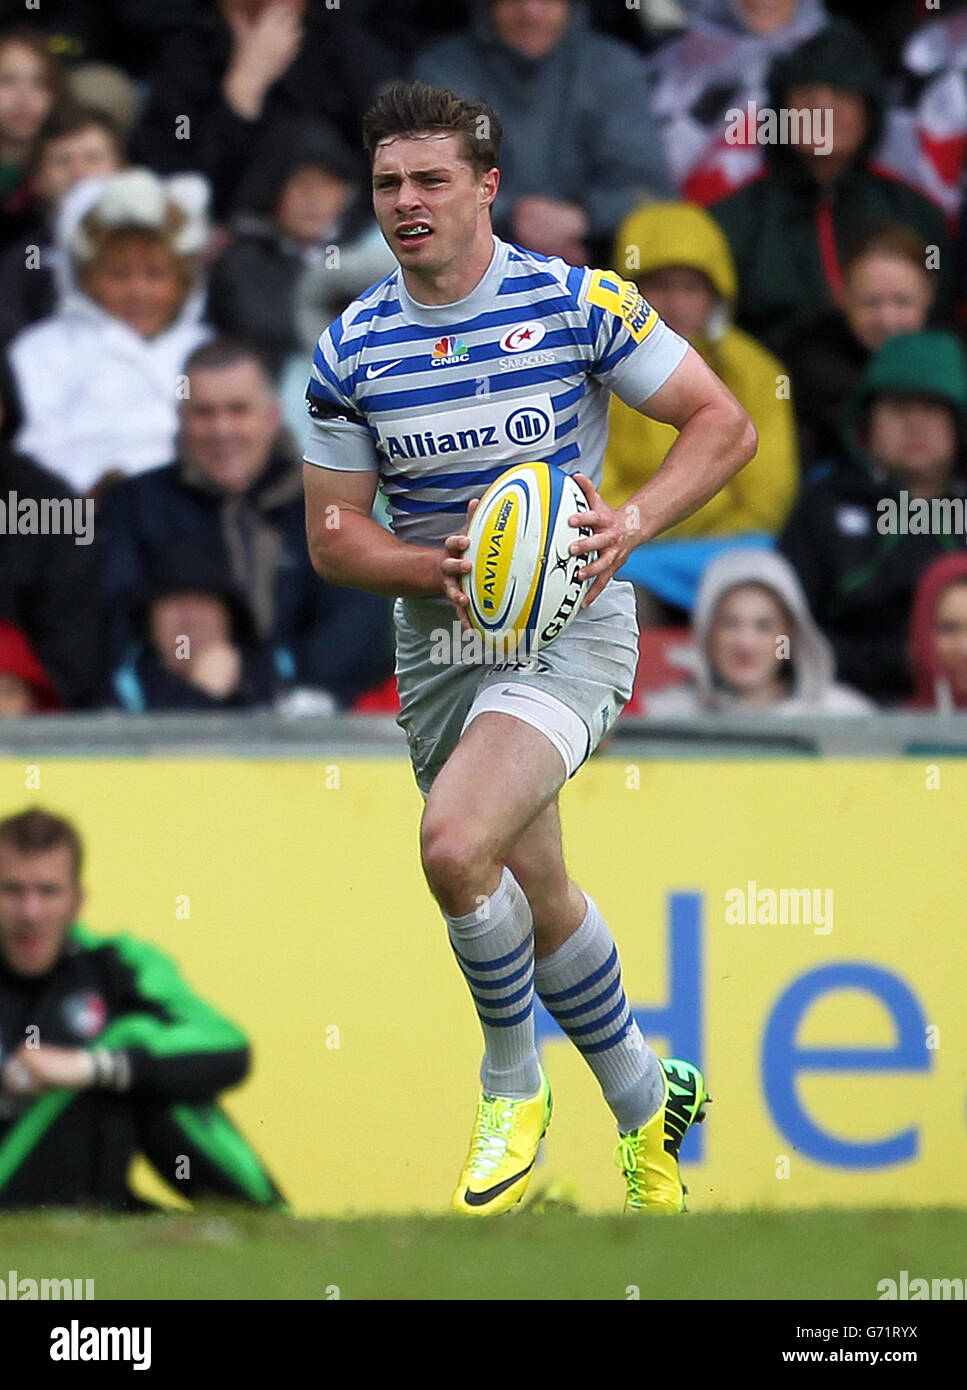 Rugby Union - Aviva Premiership - Leicester Tigers / Saracens - Welford Road. Ben Ransom, Saracens Foto Stock